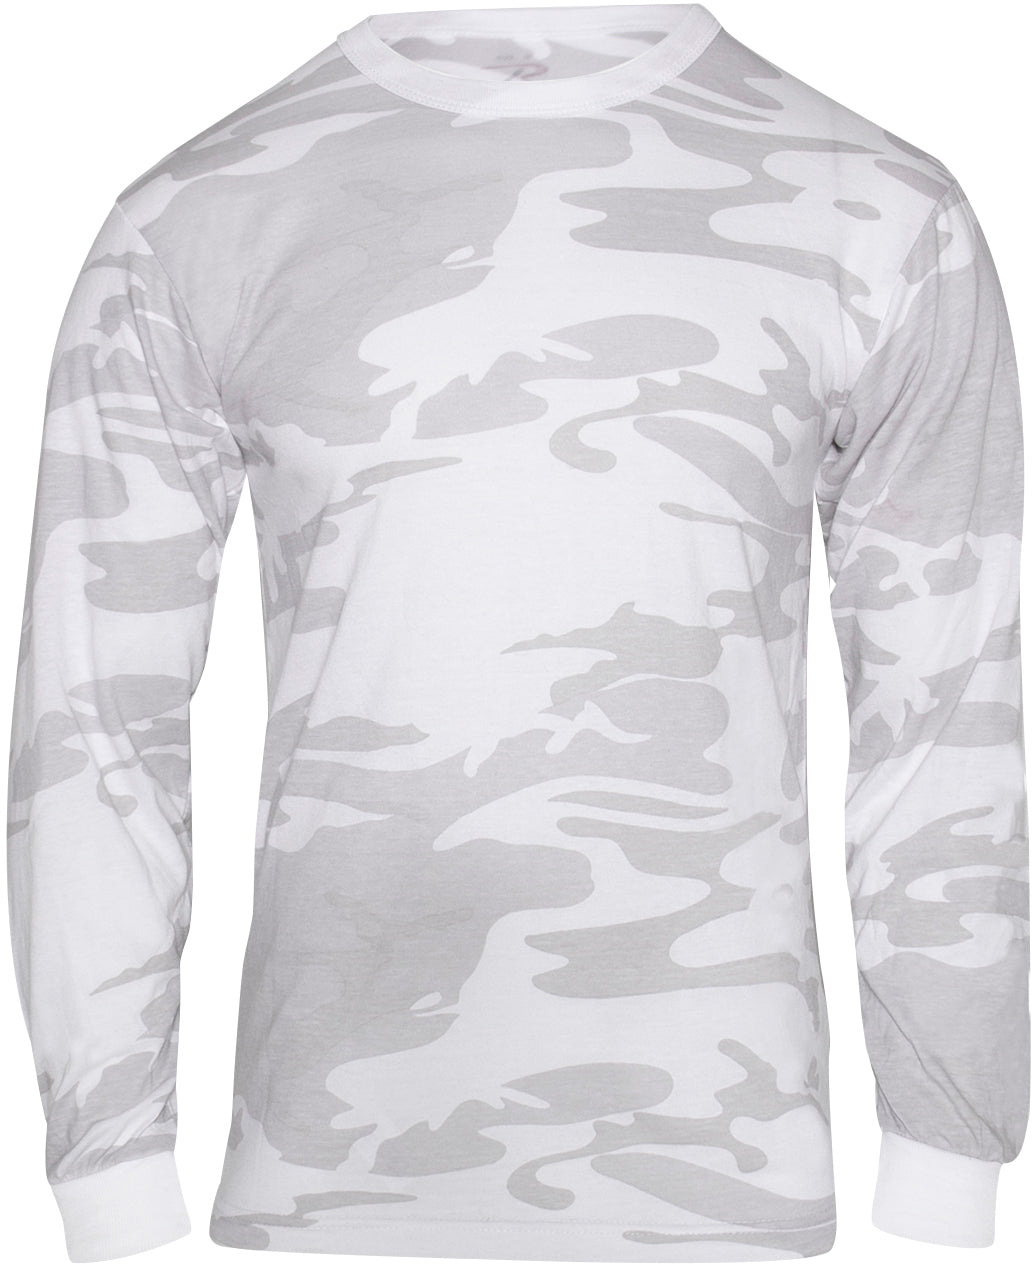 White Camo Color T-Shirts - Galaxy Army Navy